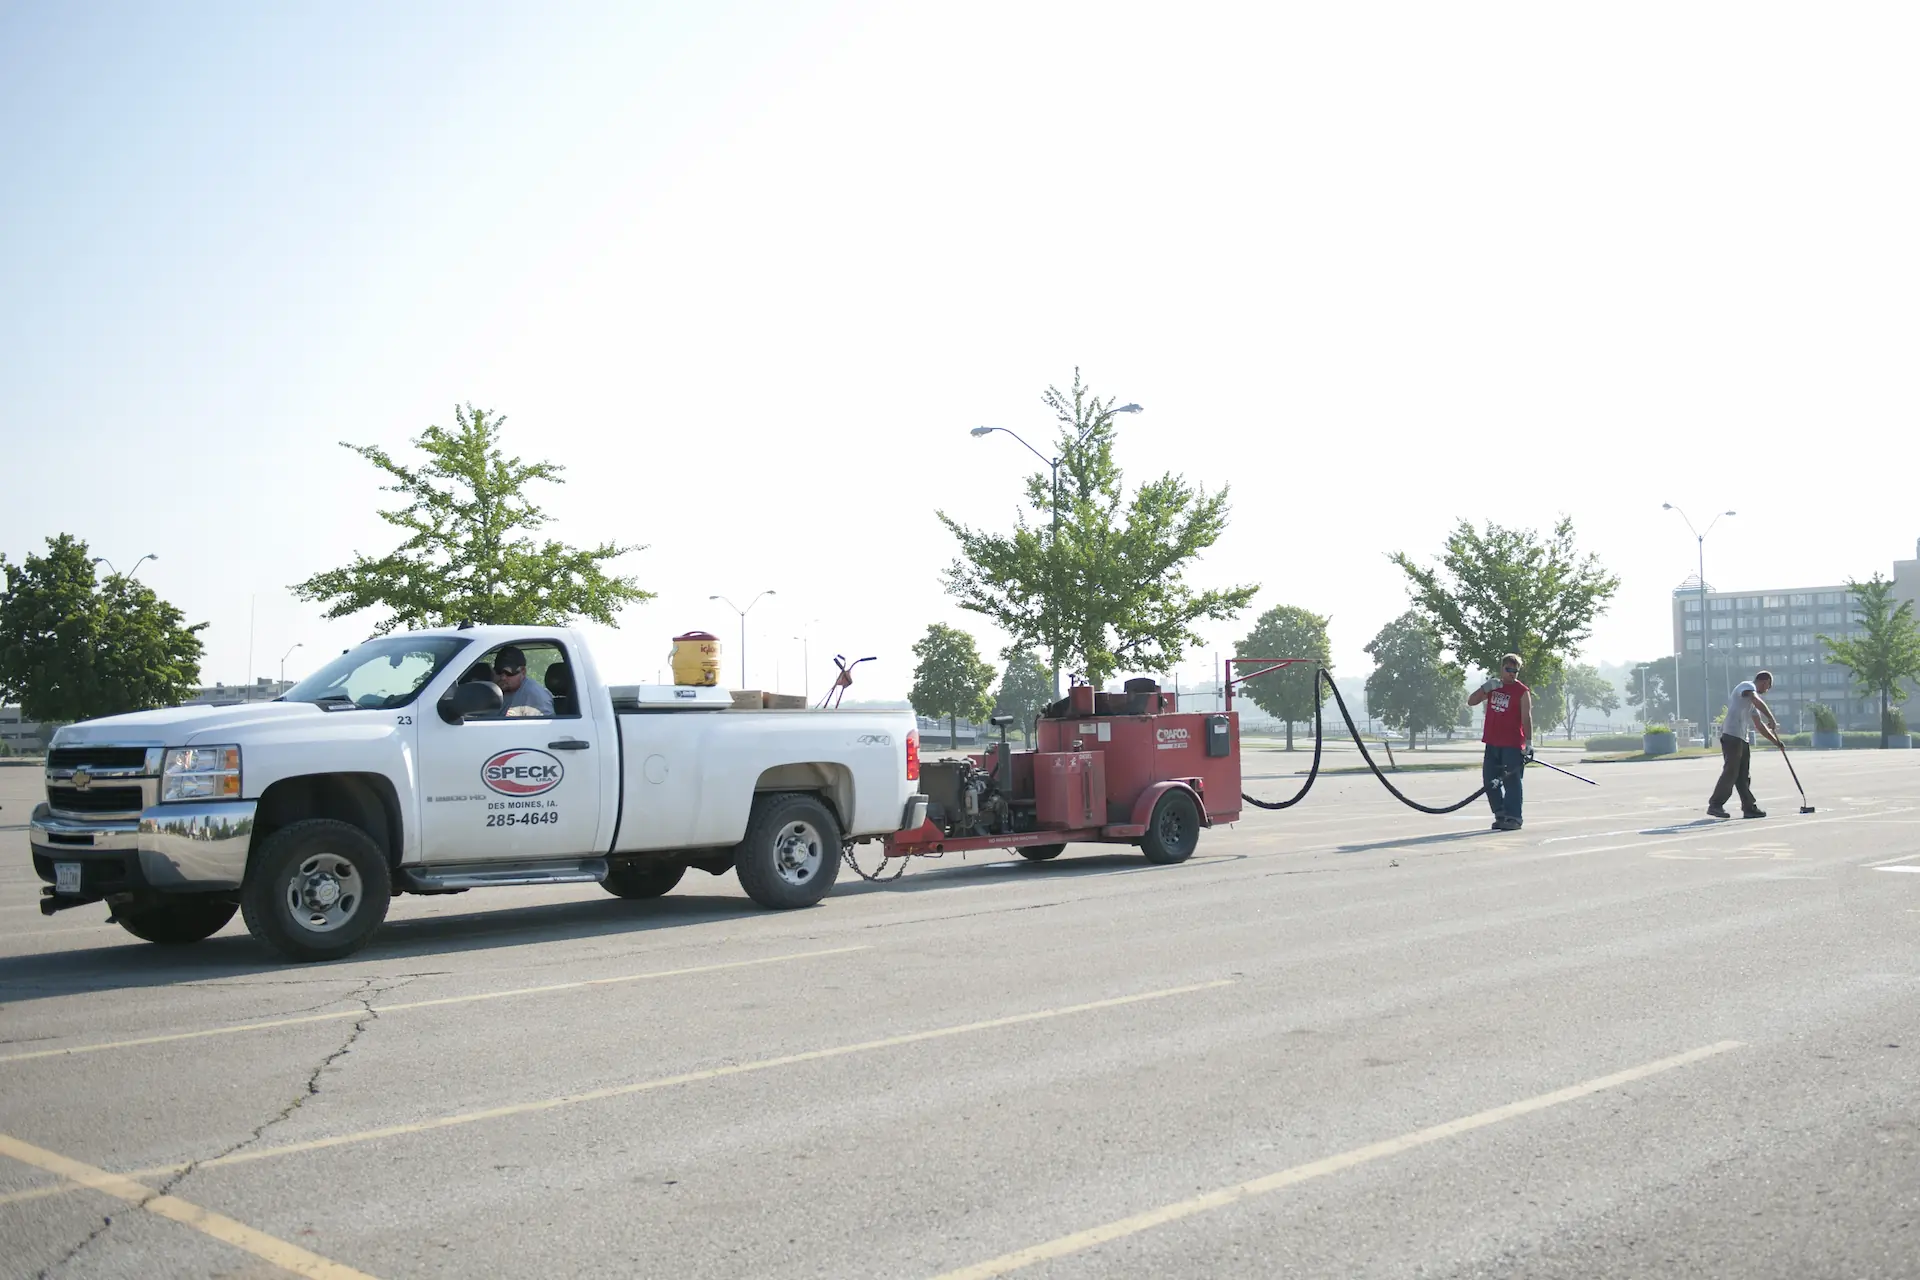 A white pickup truck from Speck USA with a resurfacing vehicle in tow repairs a commercial parking lot. Resurfacing and sealing from professional-grade services like these are part of how to maintain your parking lot.